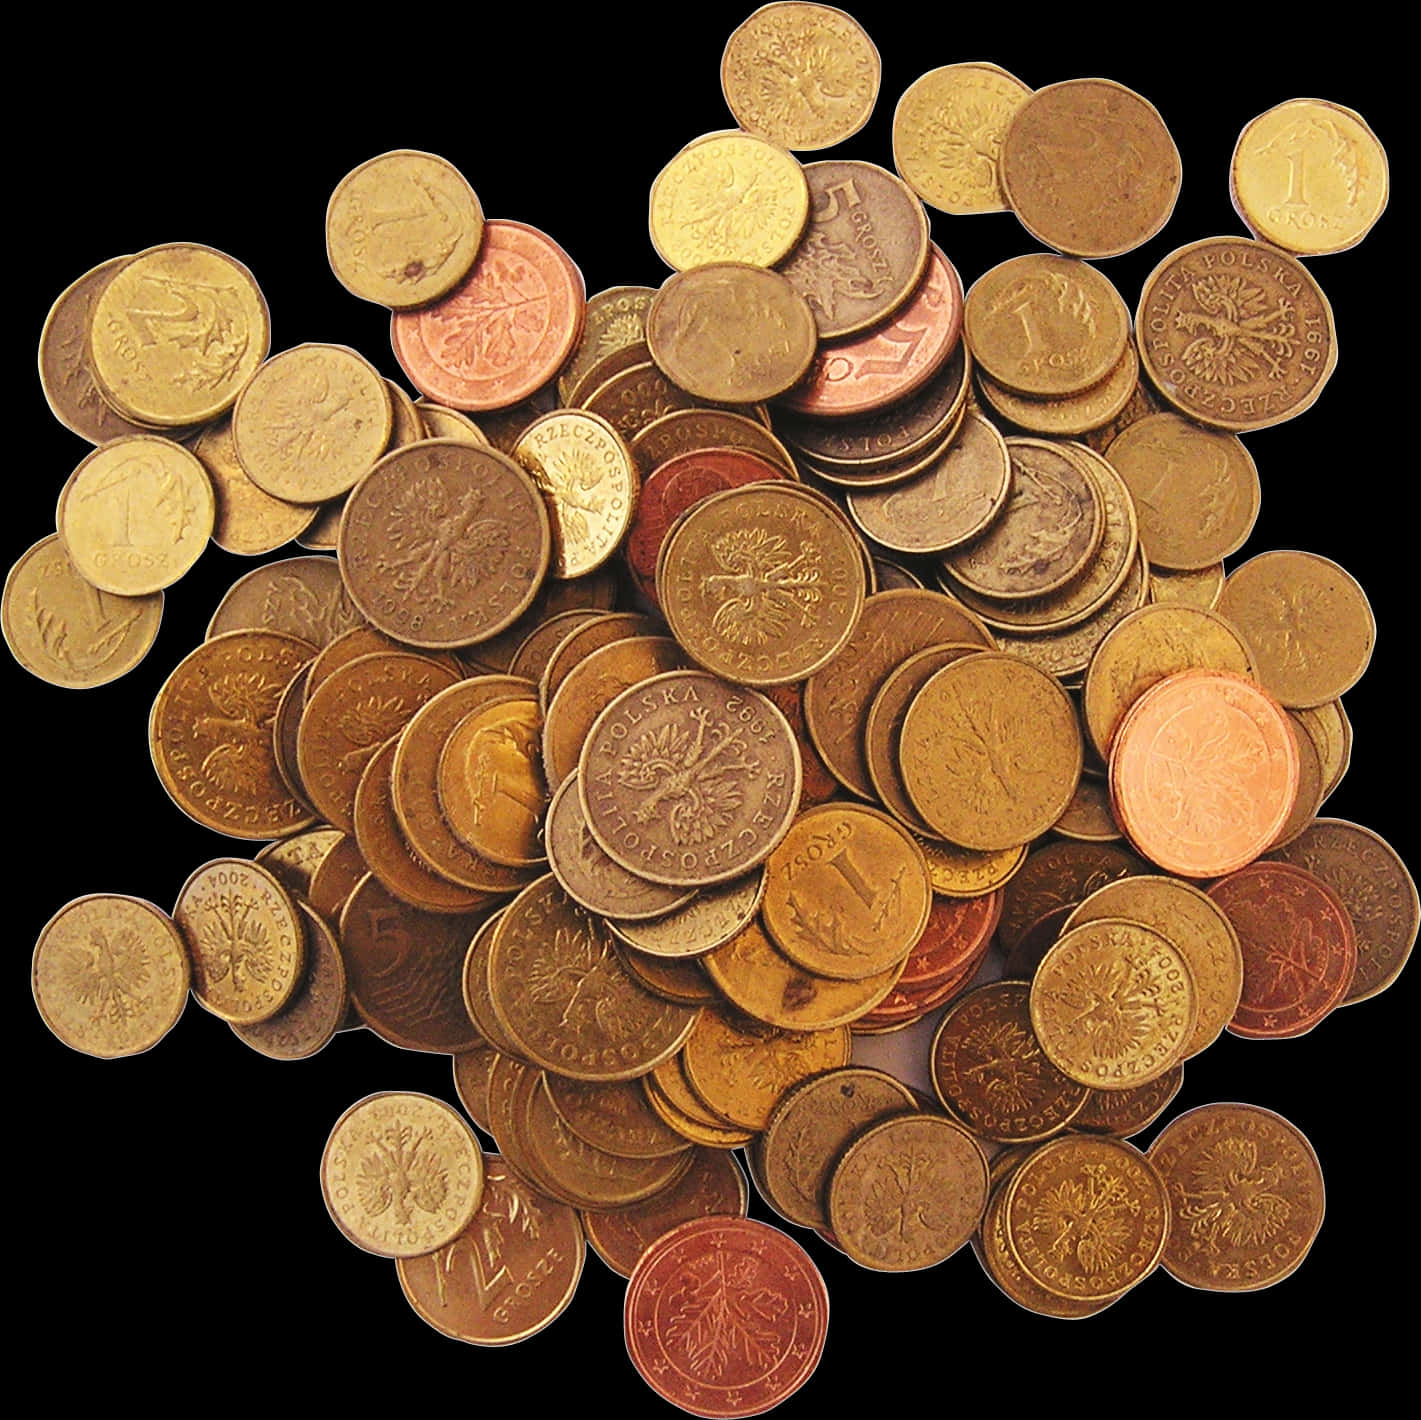 A Pile Of Coins On A Black Background